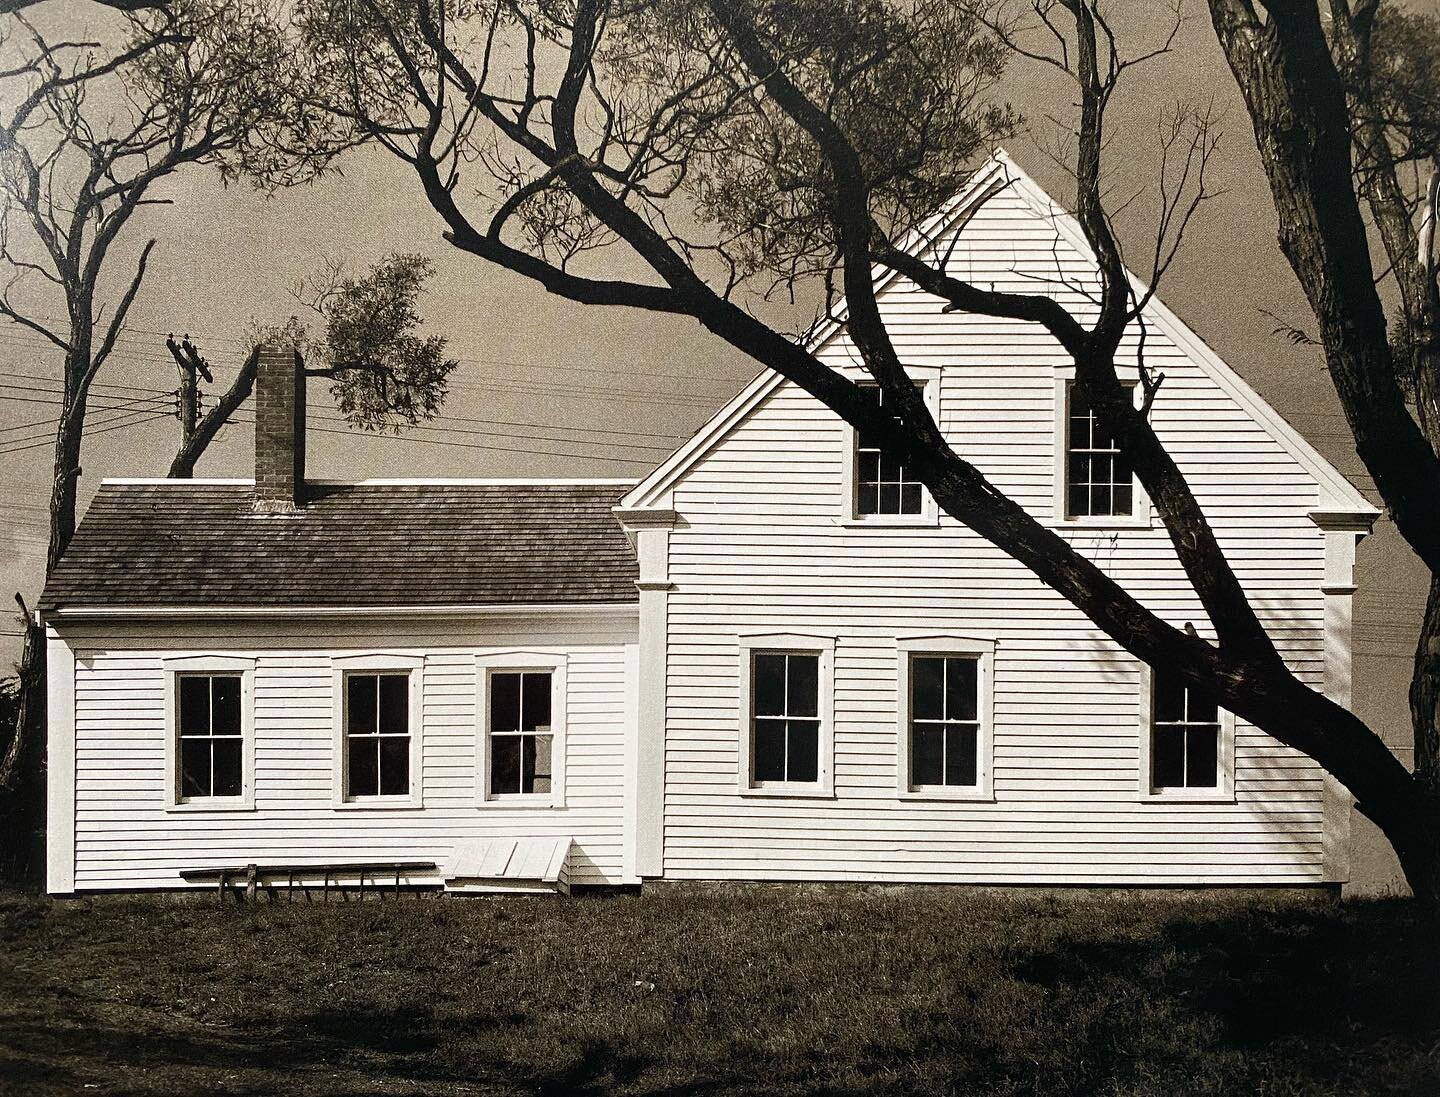 What can you say. A perfect photo of a perfect house. Titled: White House, Cqpe Cod&rdquo; by Wright Morris from 1939. We&rsquo;re especially curious about the silhouette of the tree limbs. Morris clearly framed the shot so the meandering branches ov